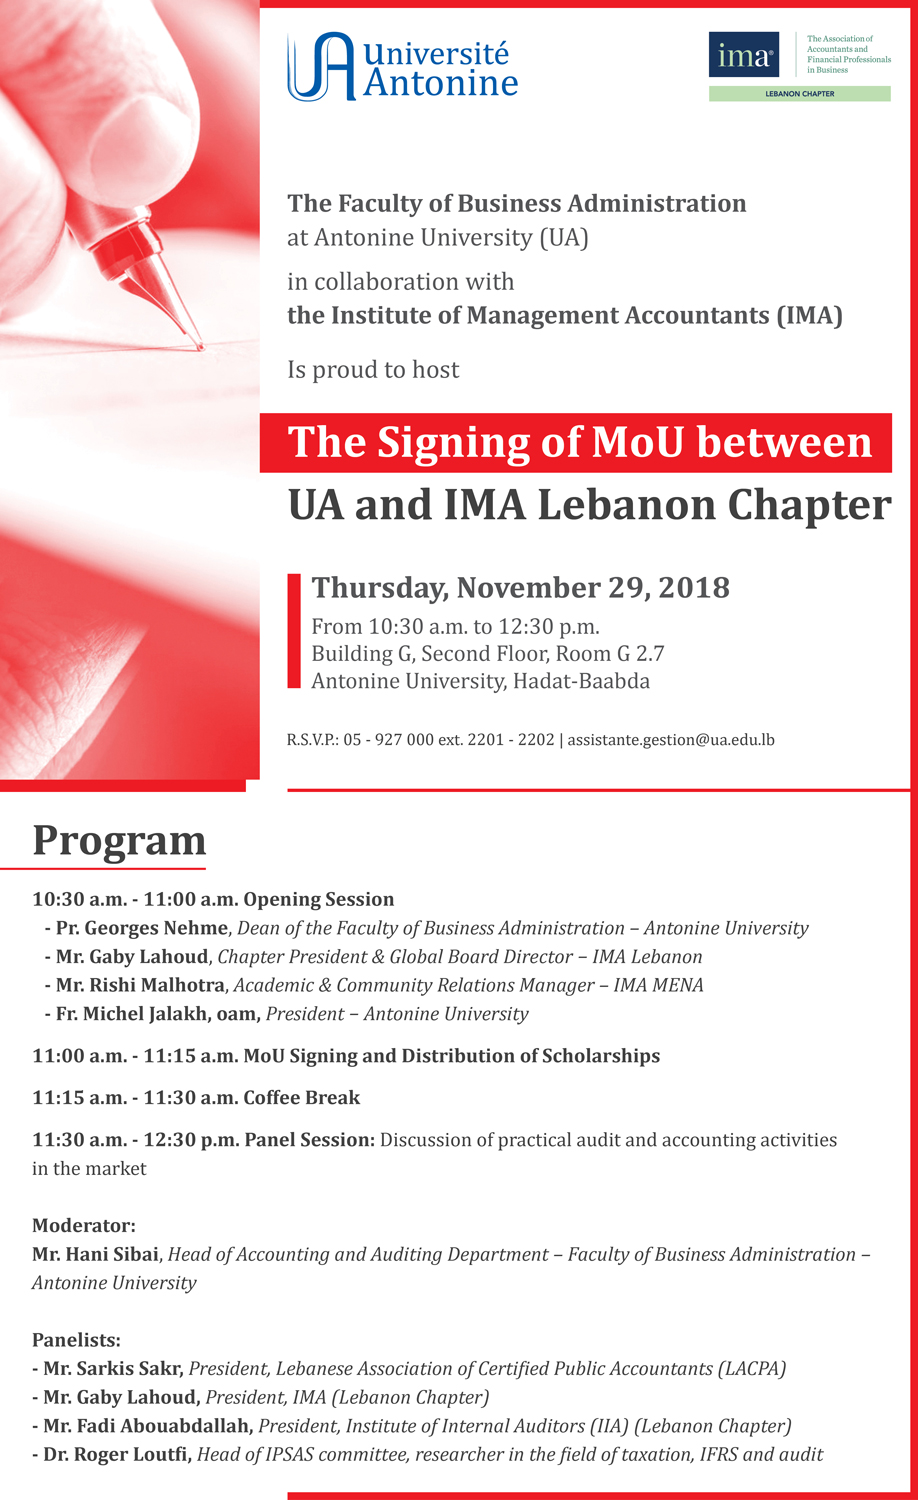 The Signing of MoU between UA and IMA Lebanon Chapter